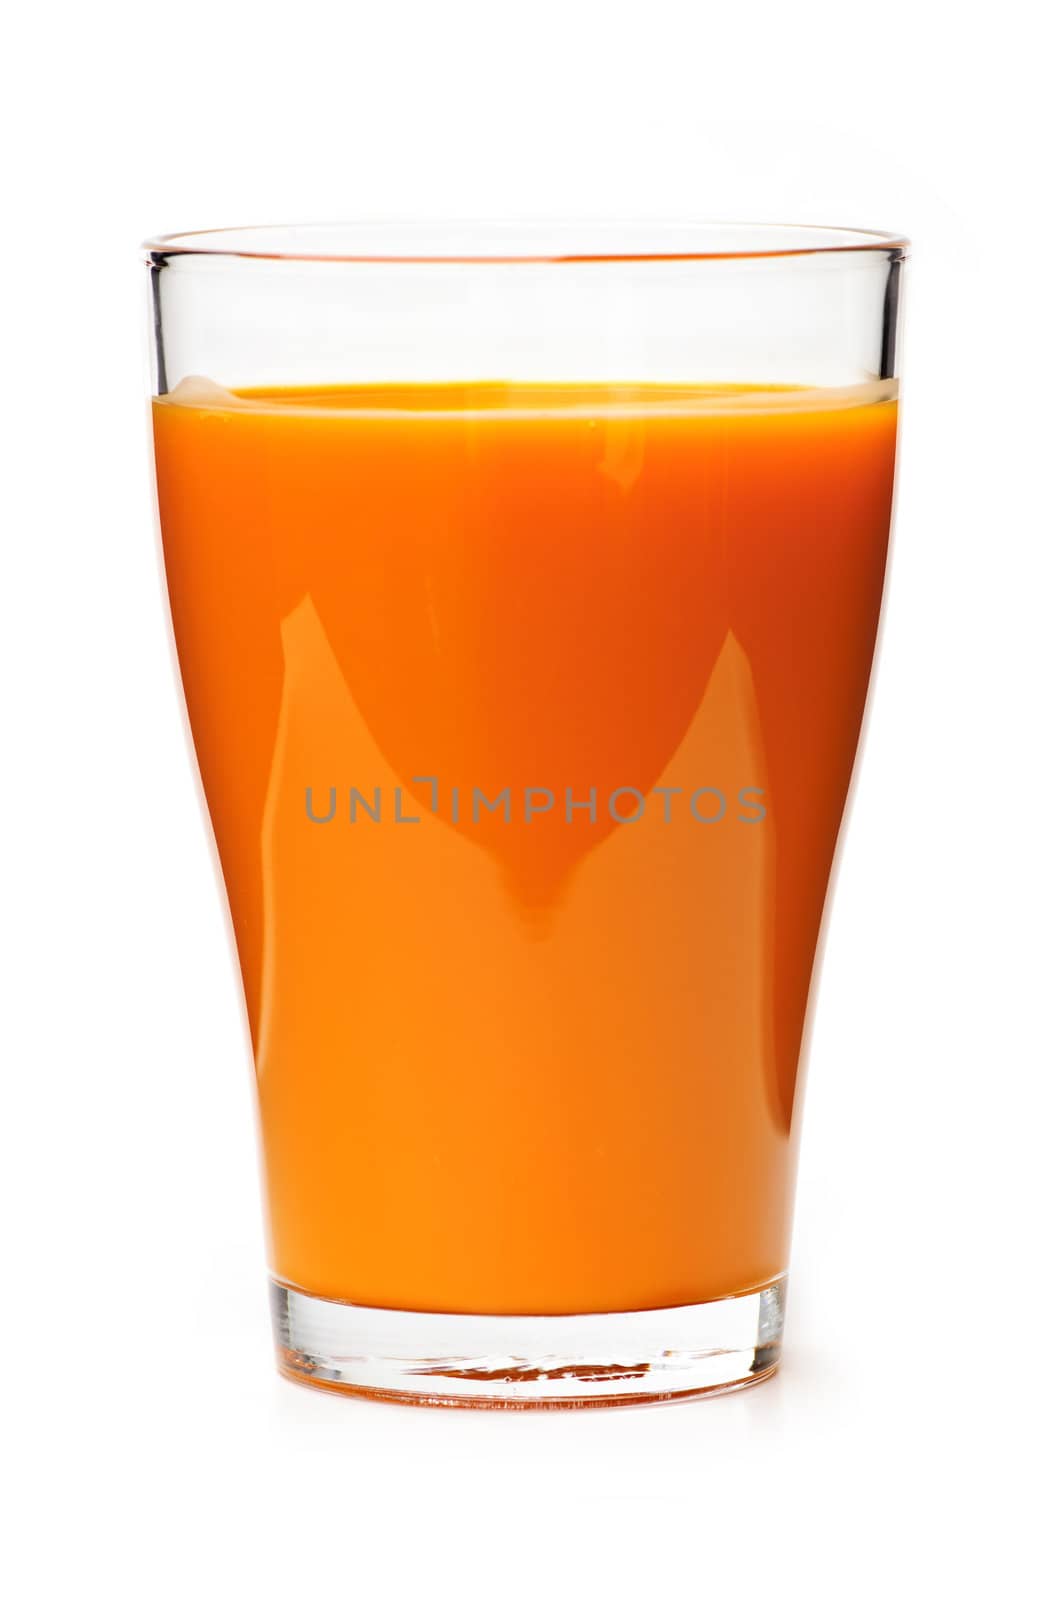 Carrot juice in clear glass isolated on white background